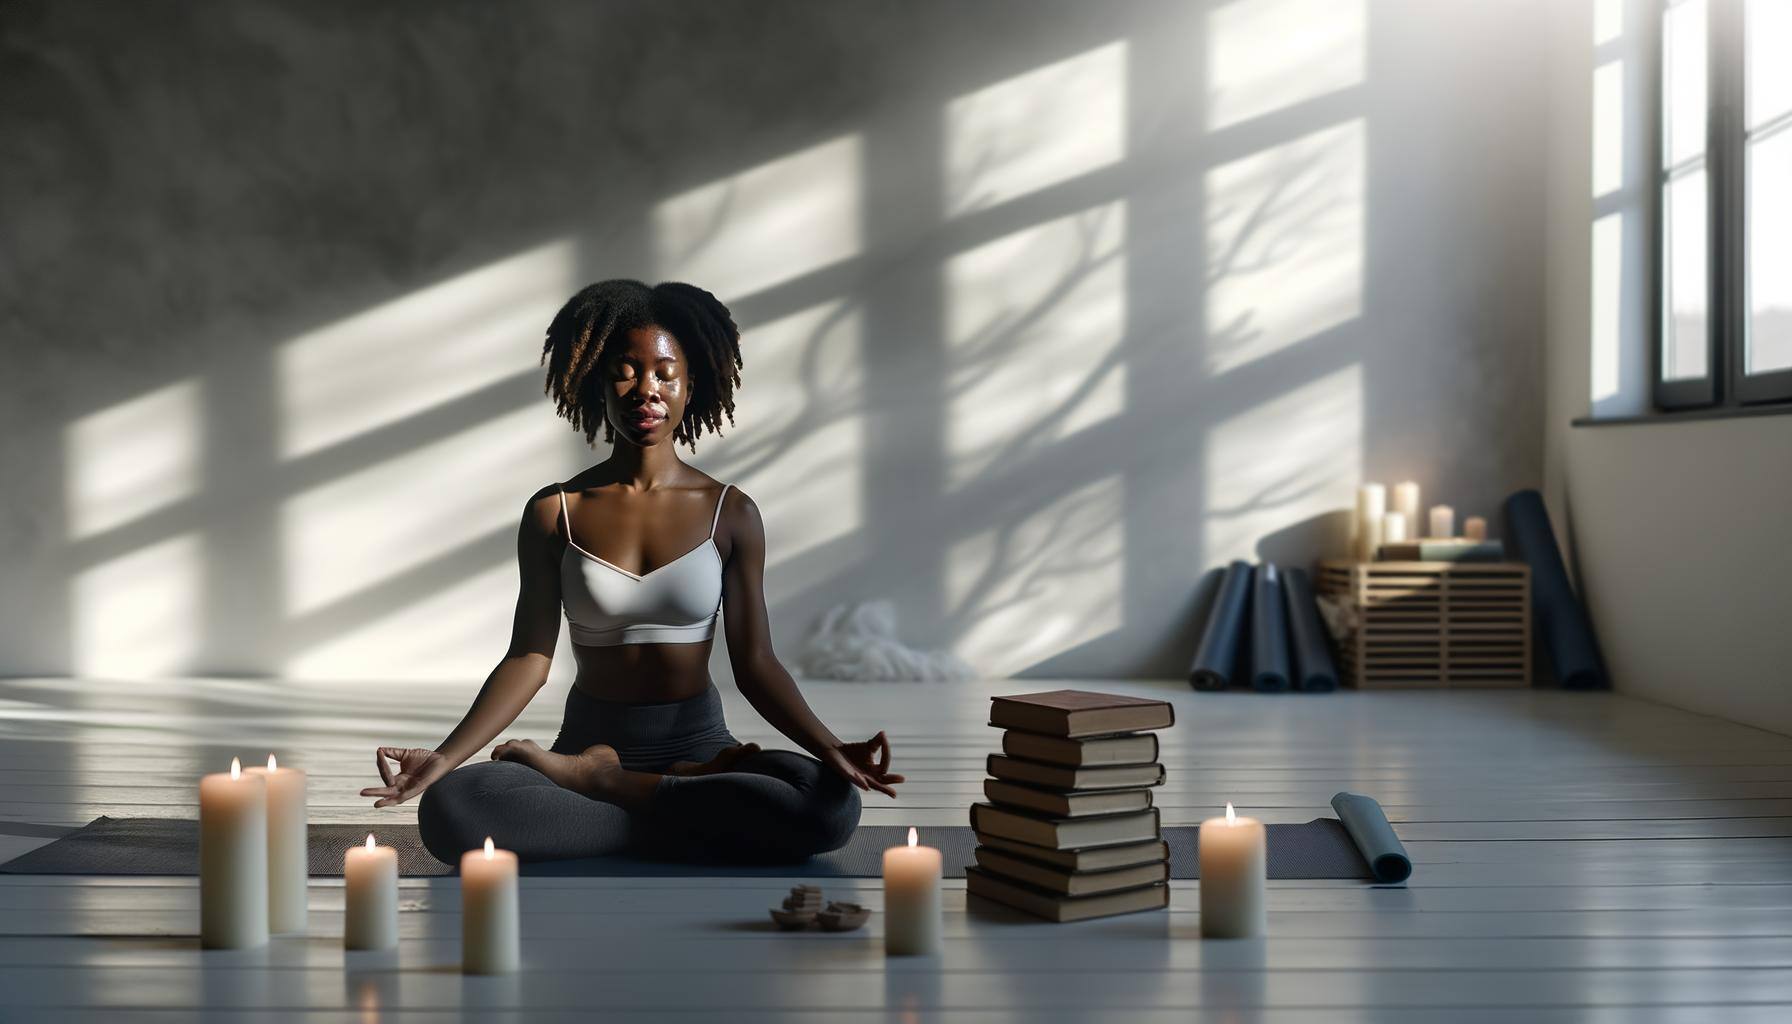 Yoga teacher surrounded by candles and pile of books